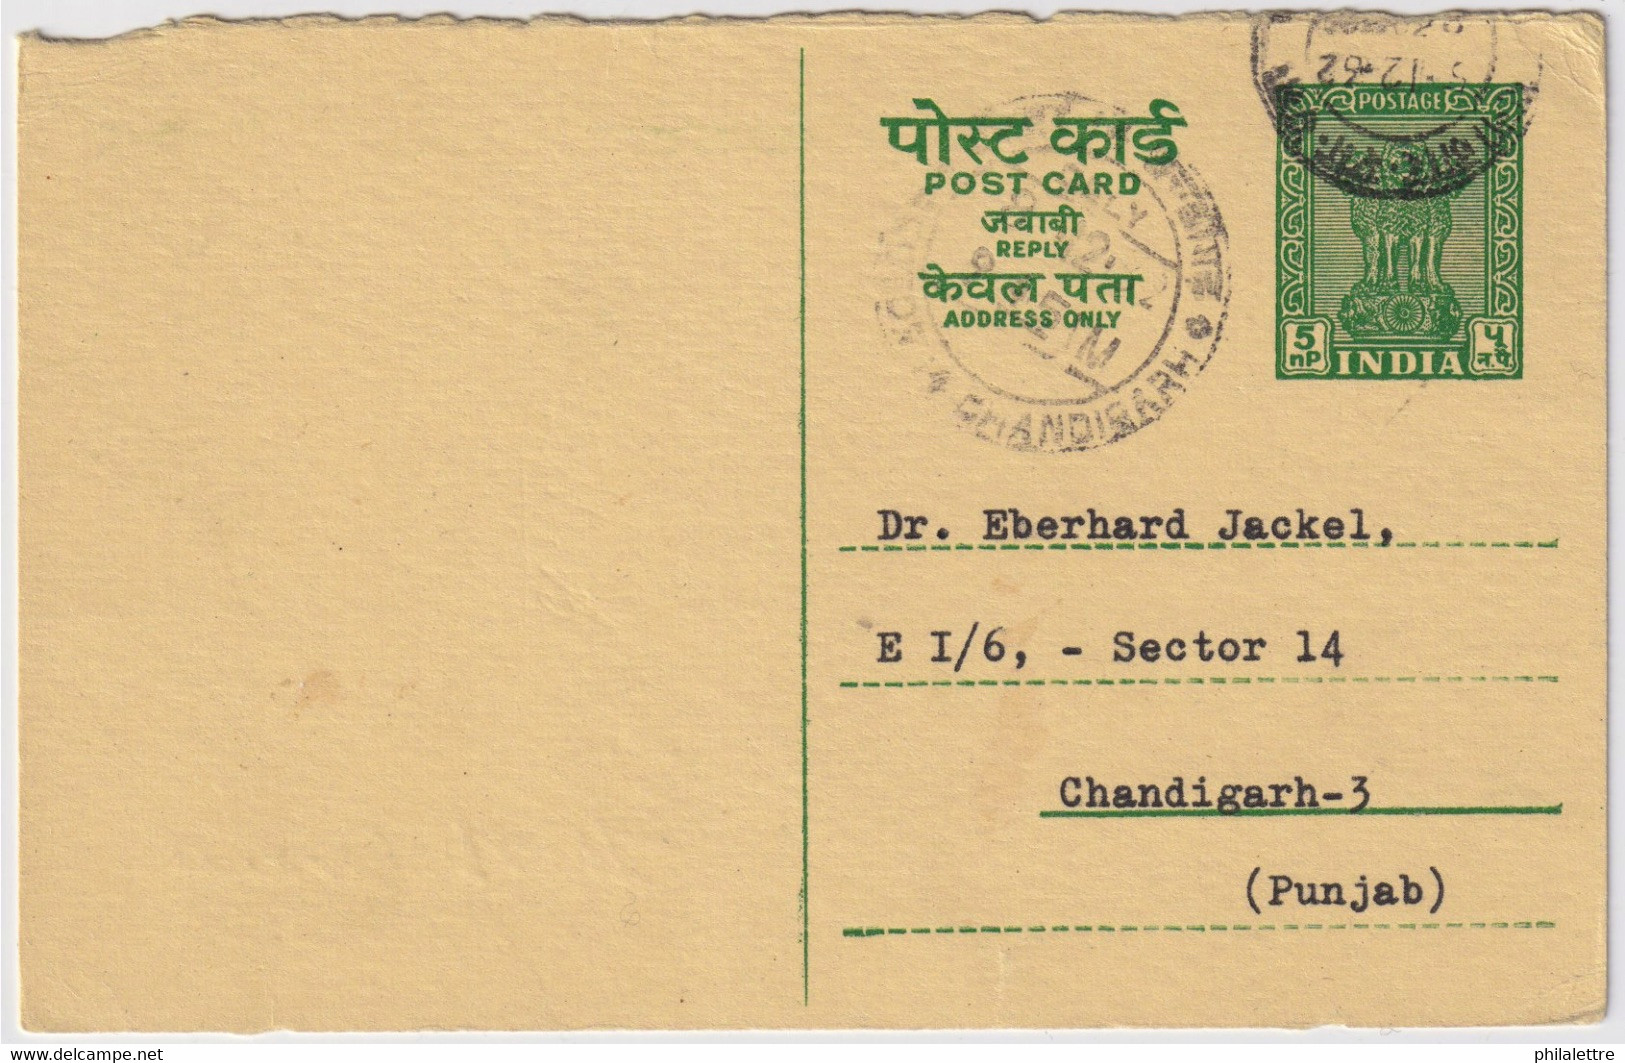 INDE / INDIA - 1962 - Fine Postal Card Used Locally In CHANDIGARH - Postkaarten